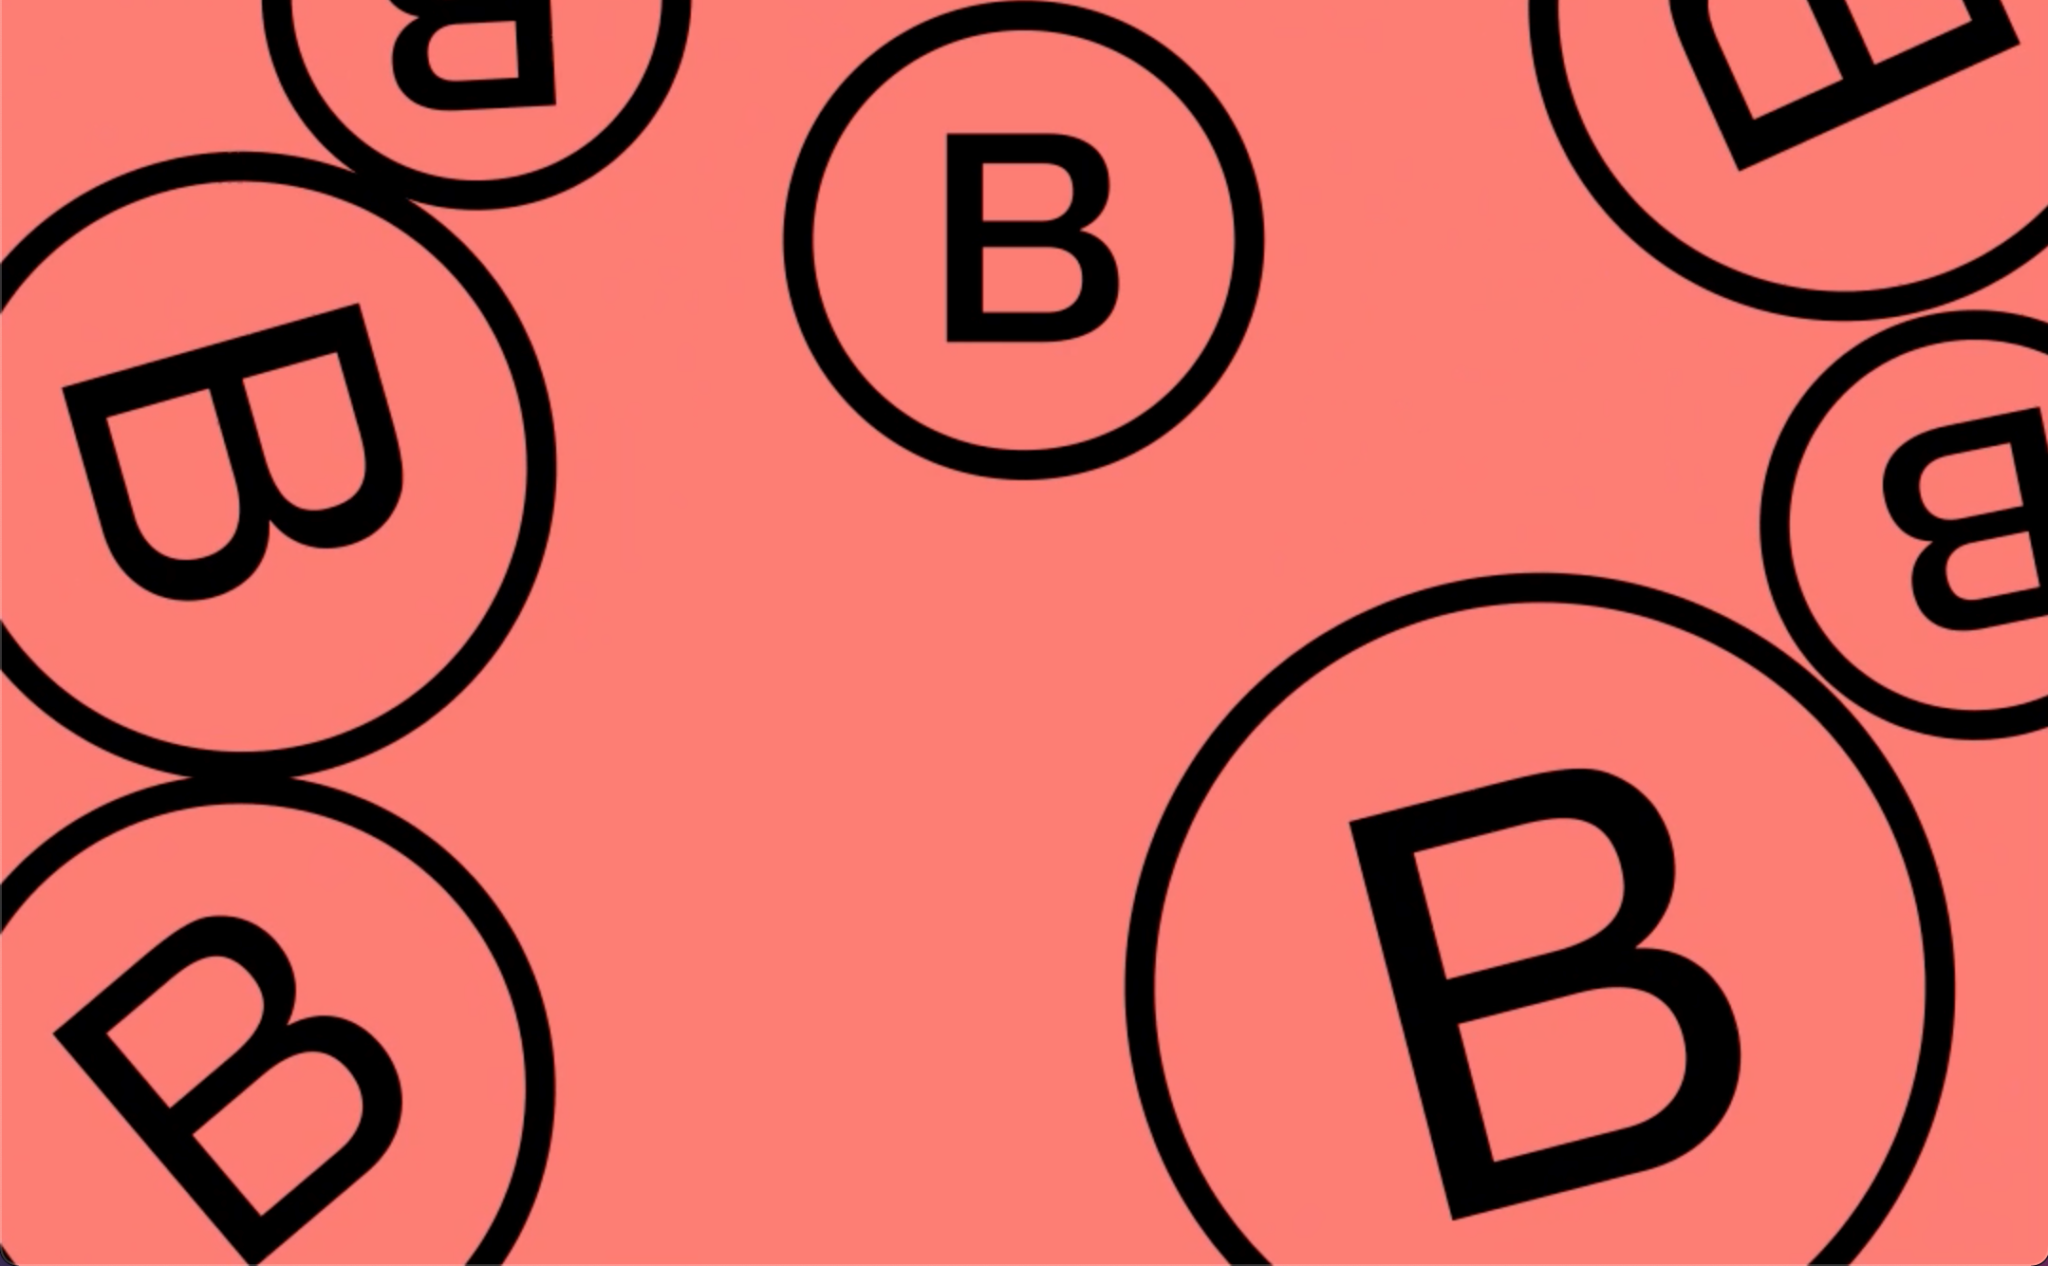 Business for Good – Using B Corp principles to scale and grow your business